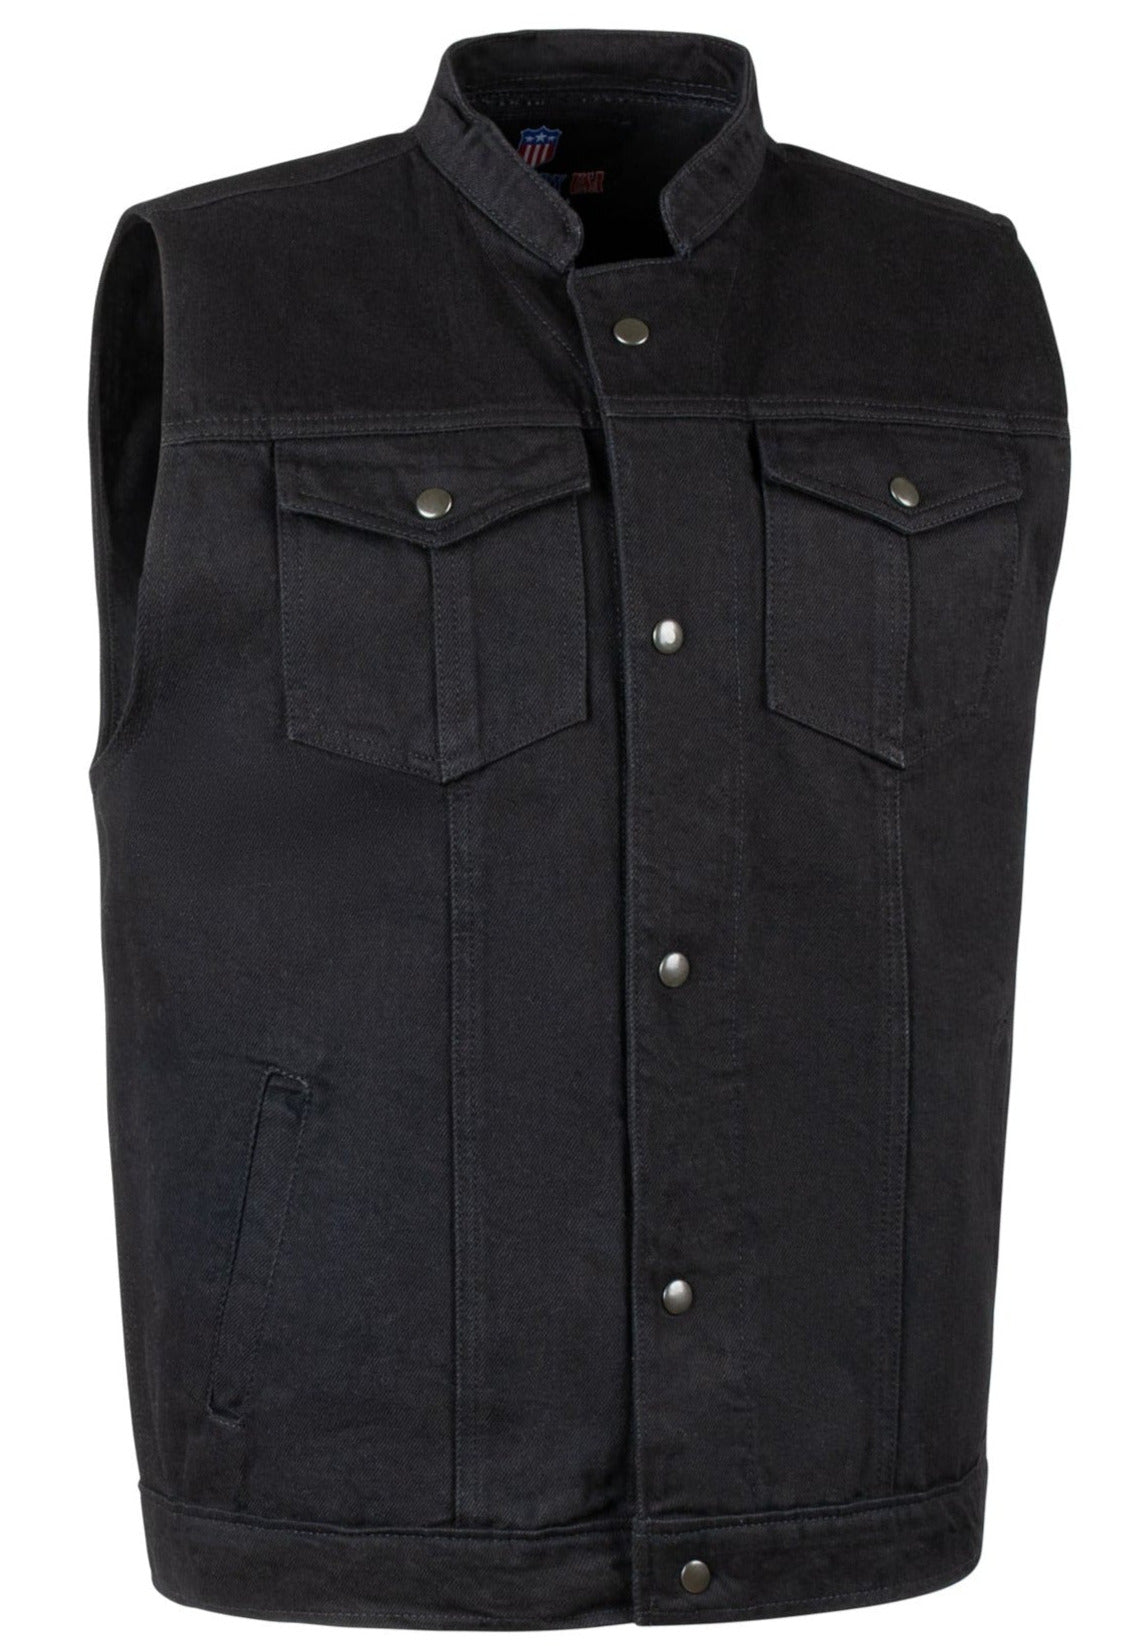 Amazon.com: Vance VB917 Mens Black Jean Style Denim SOA Motorcycle Vest  with Conceal Carry Pockets (Small, Black) : Automotive